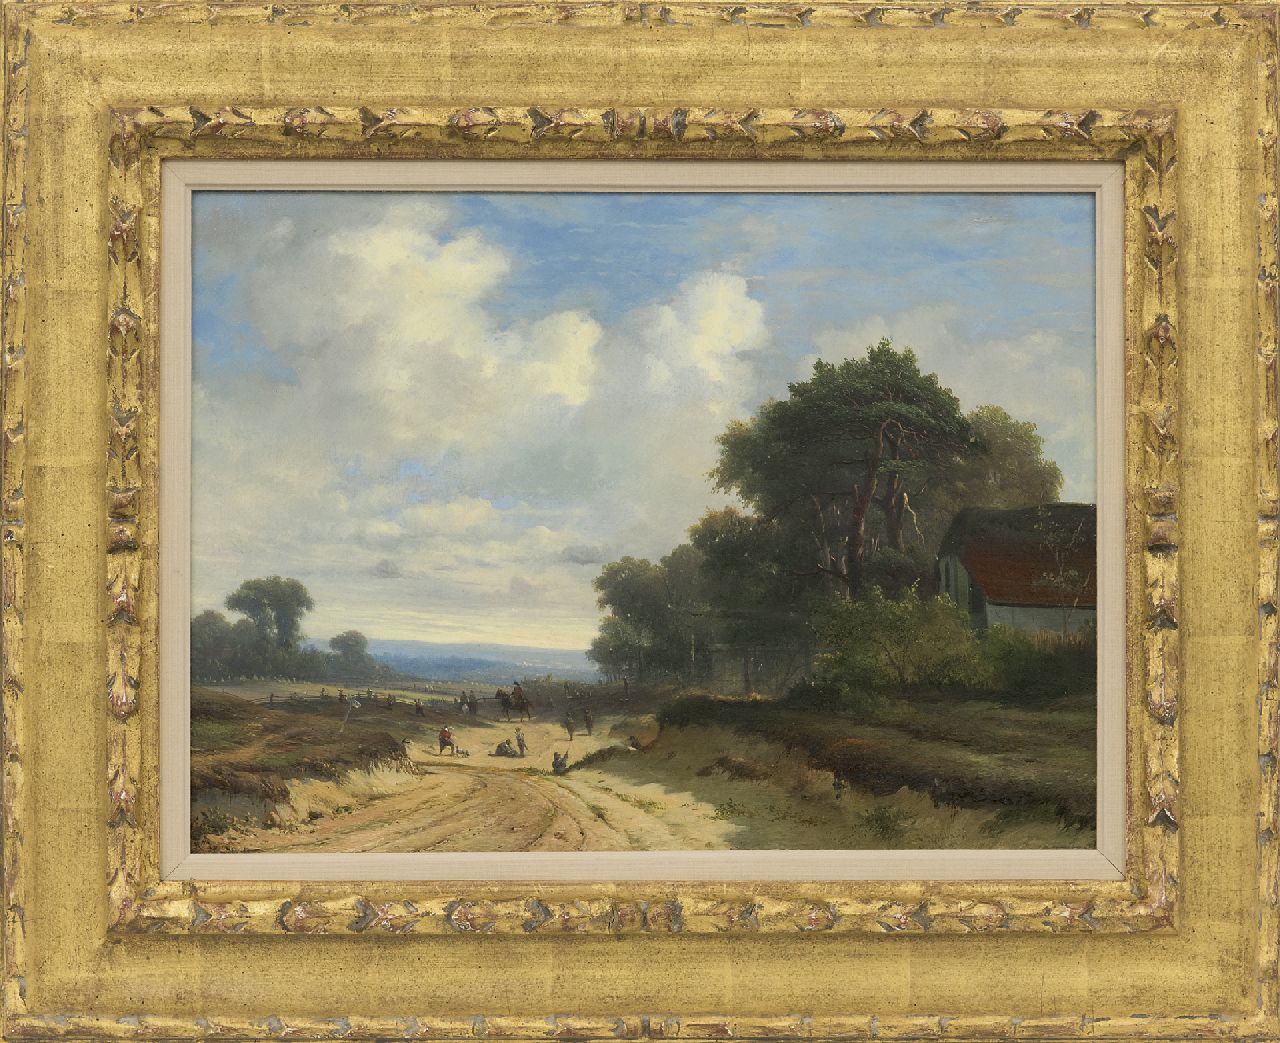 Weerts C.A.  | Coenraad Alexander Weerts | Paintings offered for sale | Infantery on a sandy track near a farmstead, oil on panel 28.5 x 39.3 cm, signed with remains of signature l.r.